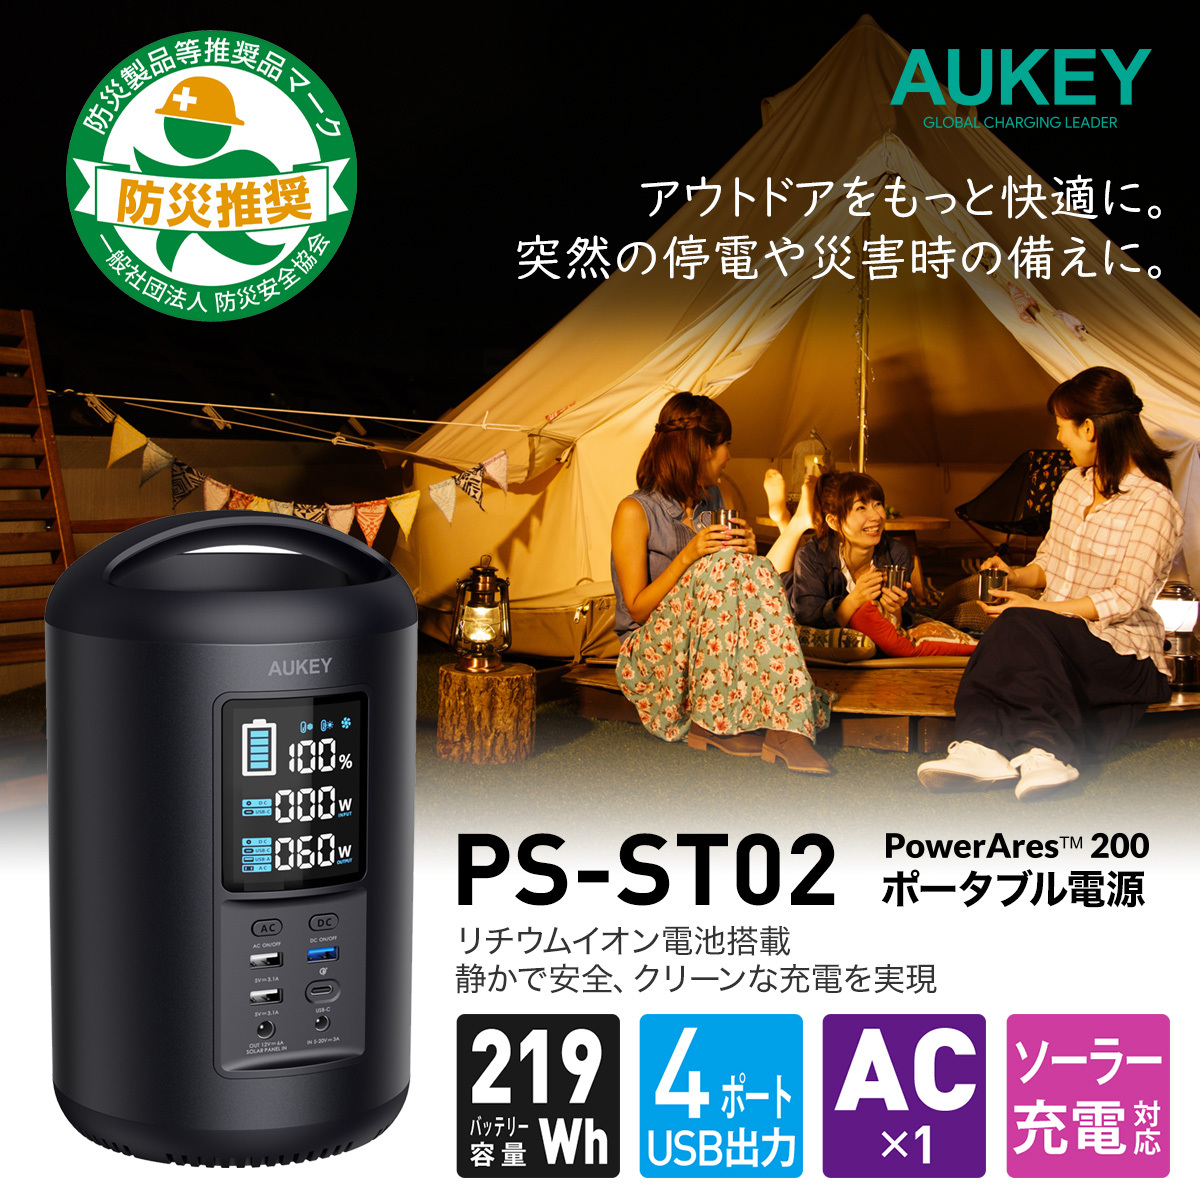 AUKEY(オーキー) ポータブル電源 Power Ares 200 (219Wh) : 1052